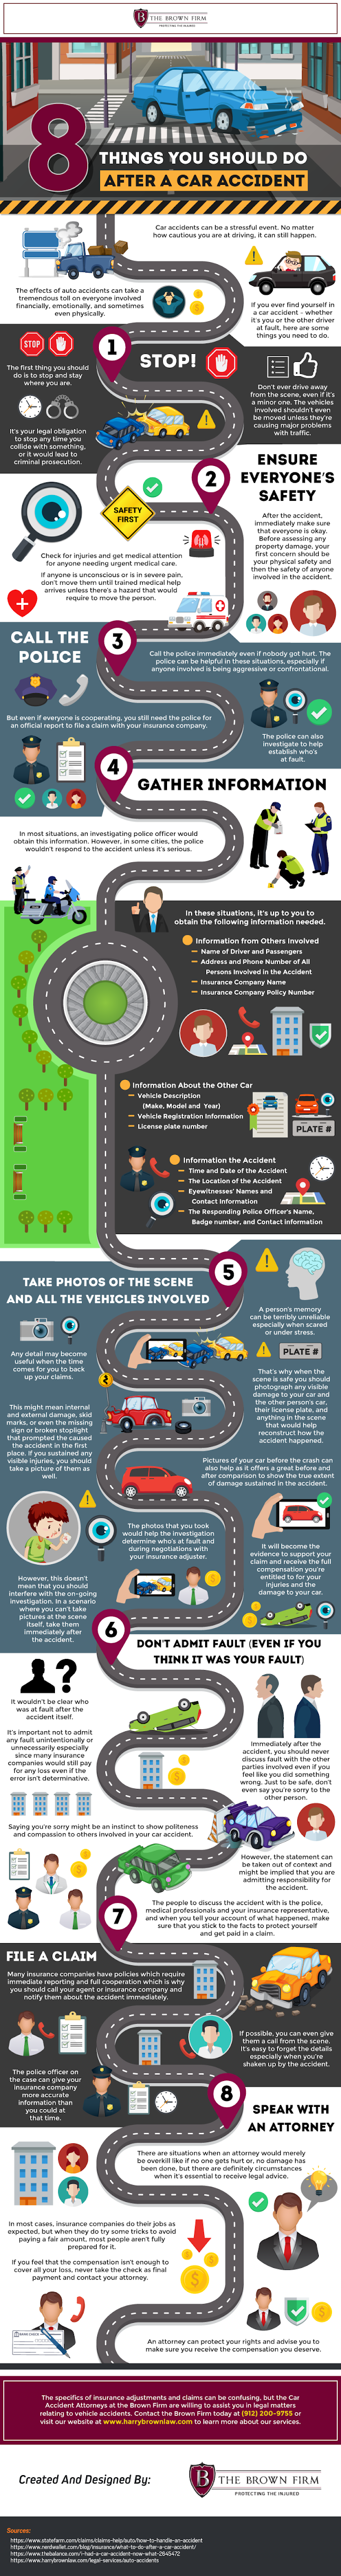 8 Things You Should Do After A Car Accident #infographic